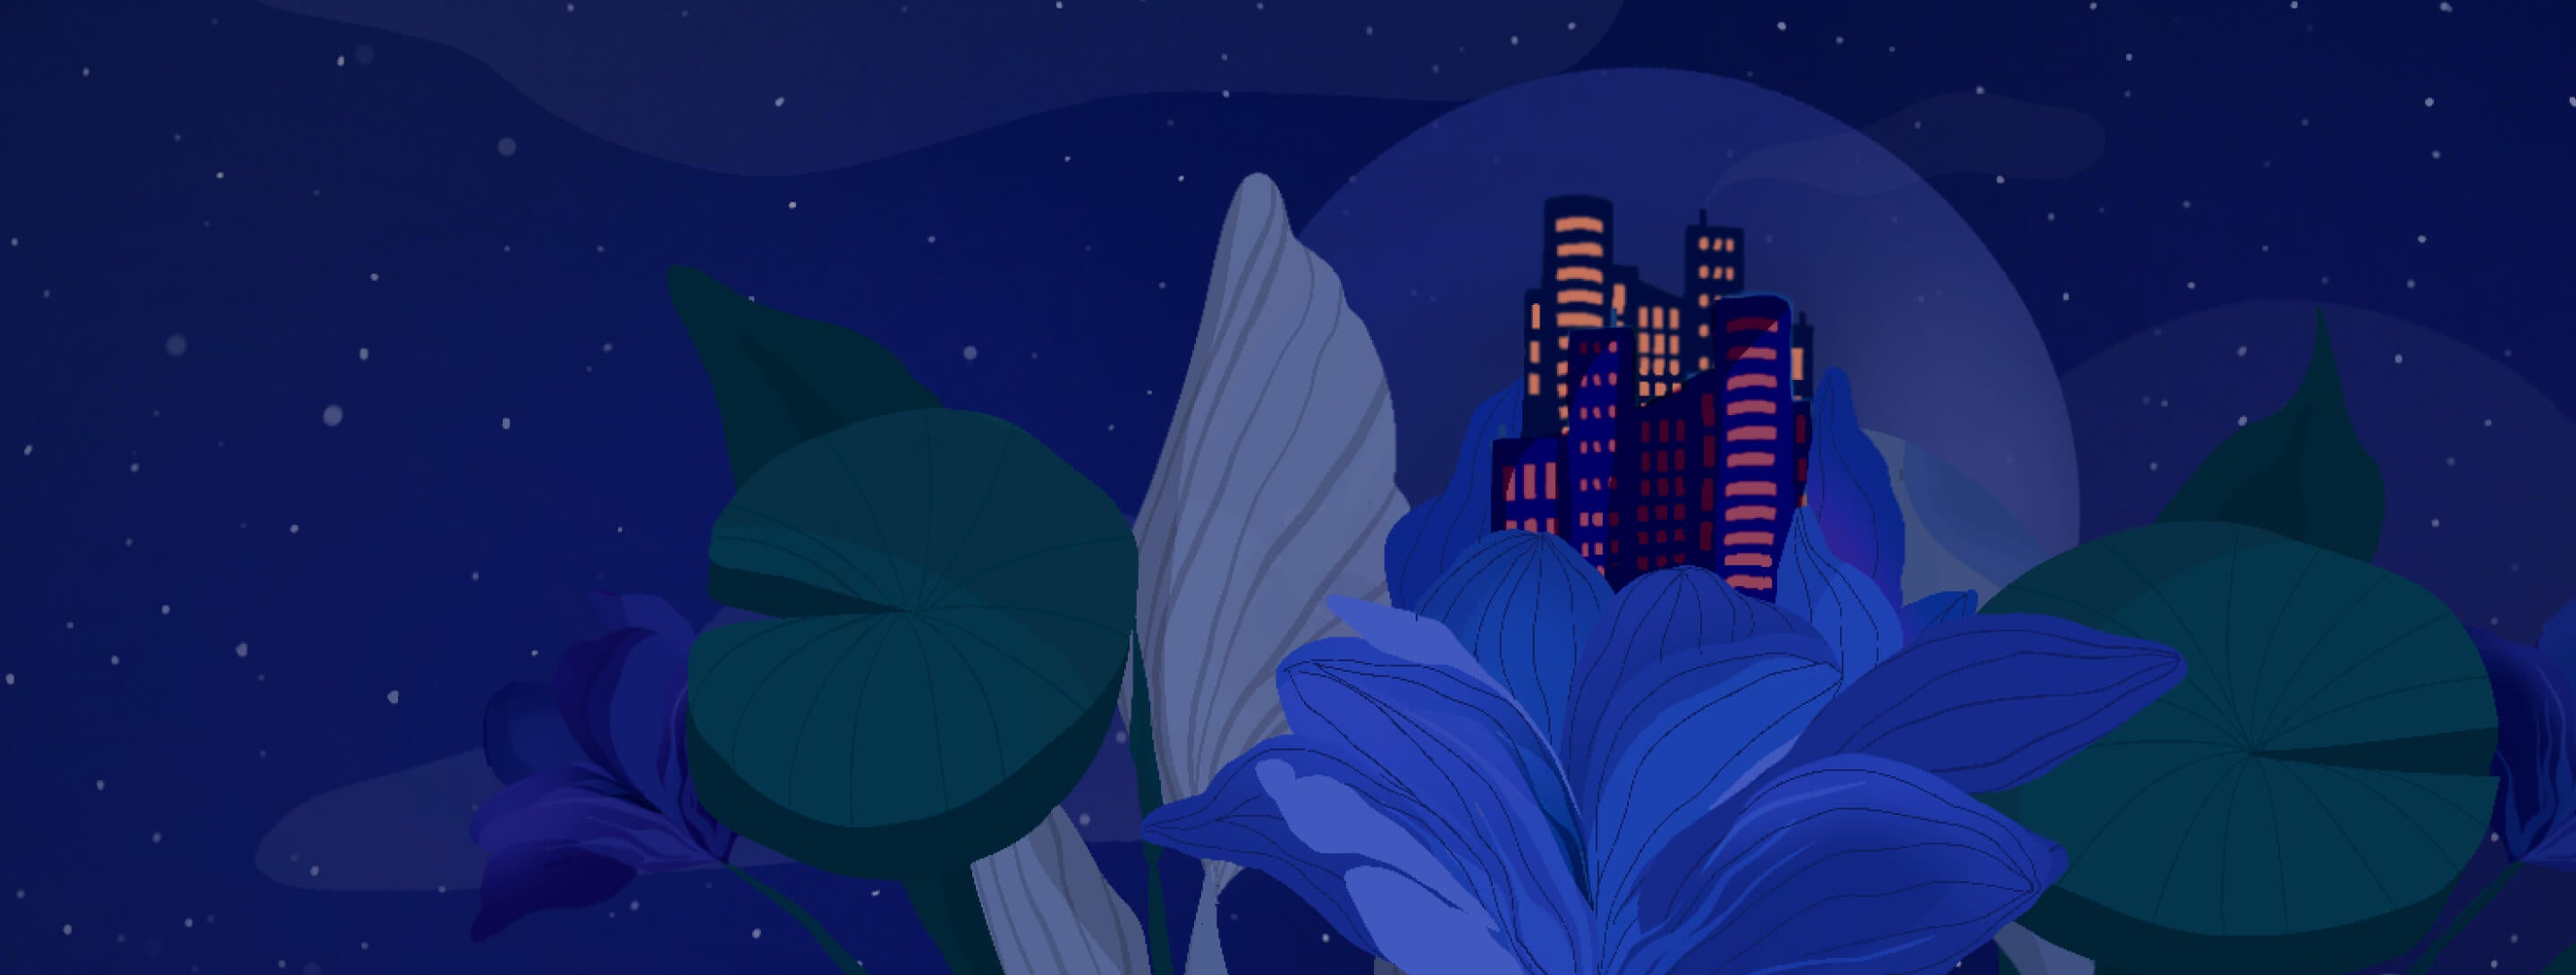 Illustrated city sitting on flowers at night